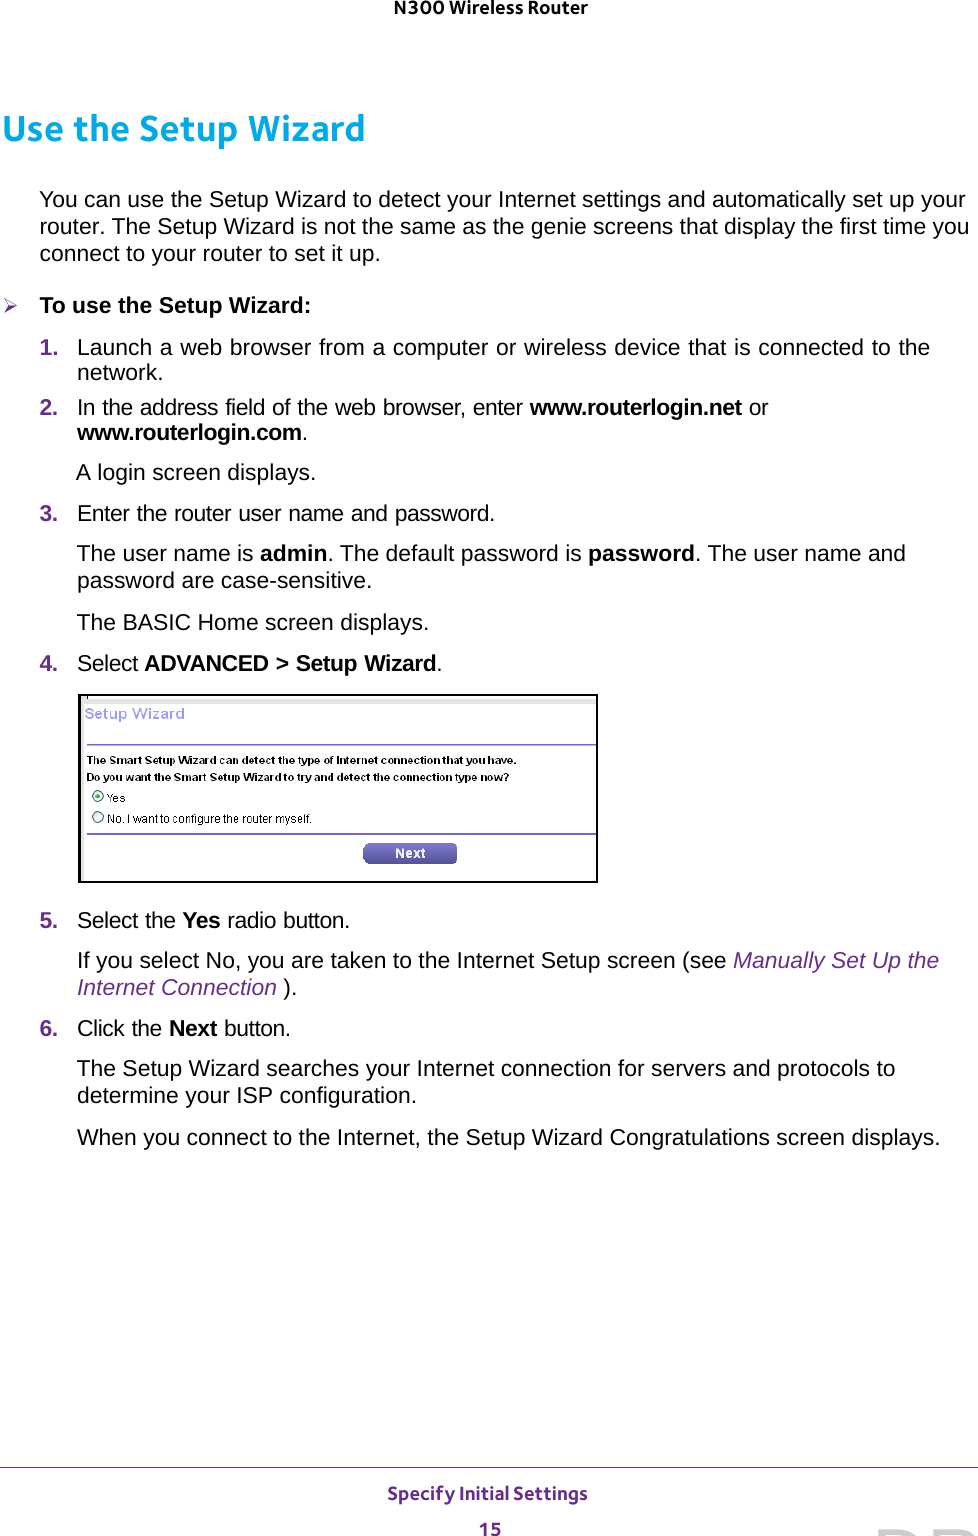 Specify Initial Settings 15 N300 Wireless RouterUse the Setup WizardYou can use the Setup Wizard to detect your Internet settings and automatically set up your router. The Setup Wizard is not the same as the genie screens that display the first time you connect to your router to set it up.To use the Setup Wizard:1.  Launch a web browser from a computer or wireless device that is connected to the network.2.  In the address field of the web browser, enter www.routerlogin.net or www.routerlogin.com.A login screen displays.3.  Enter the router user name and password.The user name is admin. The default password is password. The user name and password are case-sensitive.The BASIC Home screen displays. 4.  Select ADVANCED &gt; Setup Wizard. 5.  Select the Yes radio button. If you select No, you are taken to the Internet Setup screen (see Manually Set Up the Internet Connection ). 6.  Click the Next button.The Setup Wizard searches your Internet connection for servers and protocols to determine your ISP configuration. When you connect to the Internet, the Setup Wizard Congratulations screen displays.DRAFT